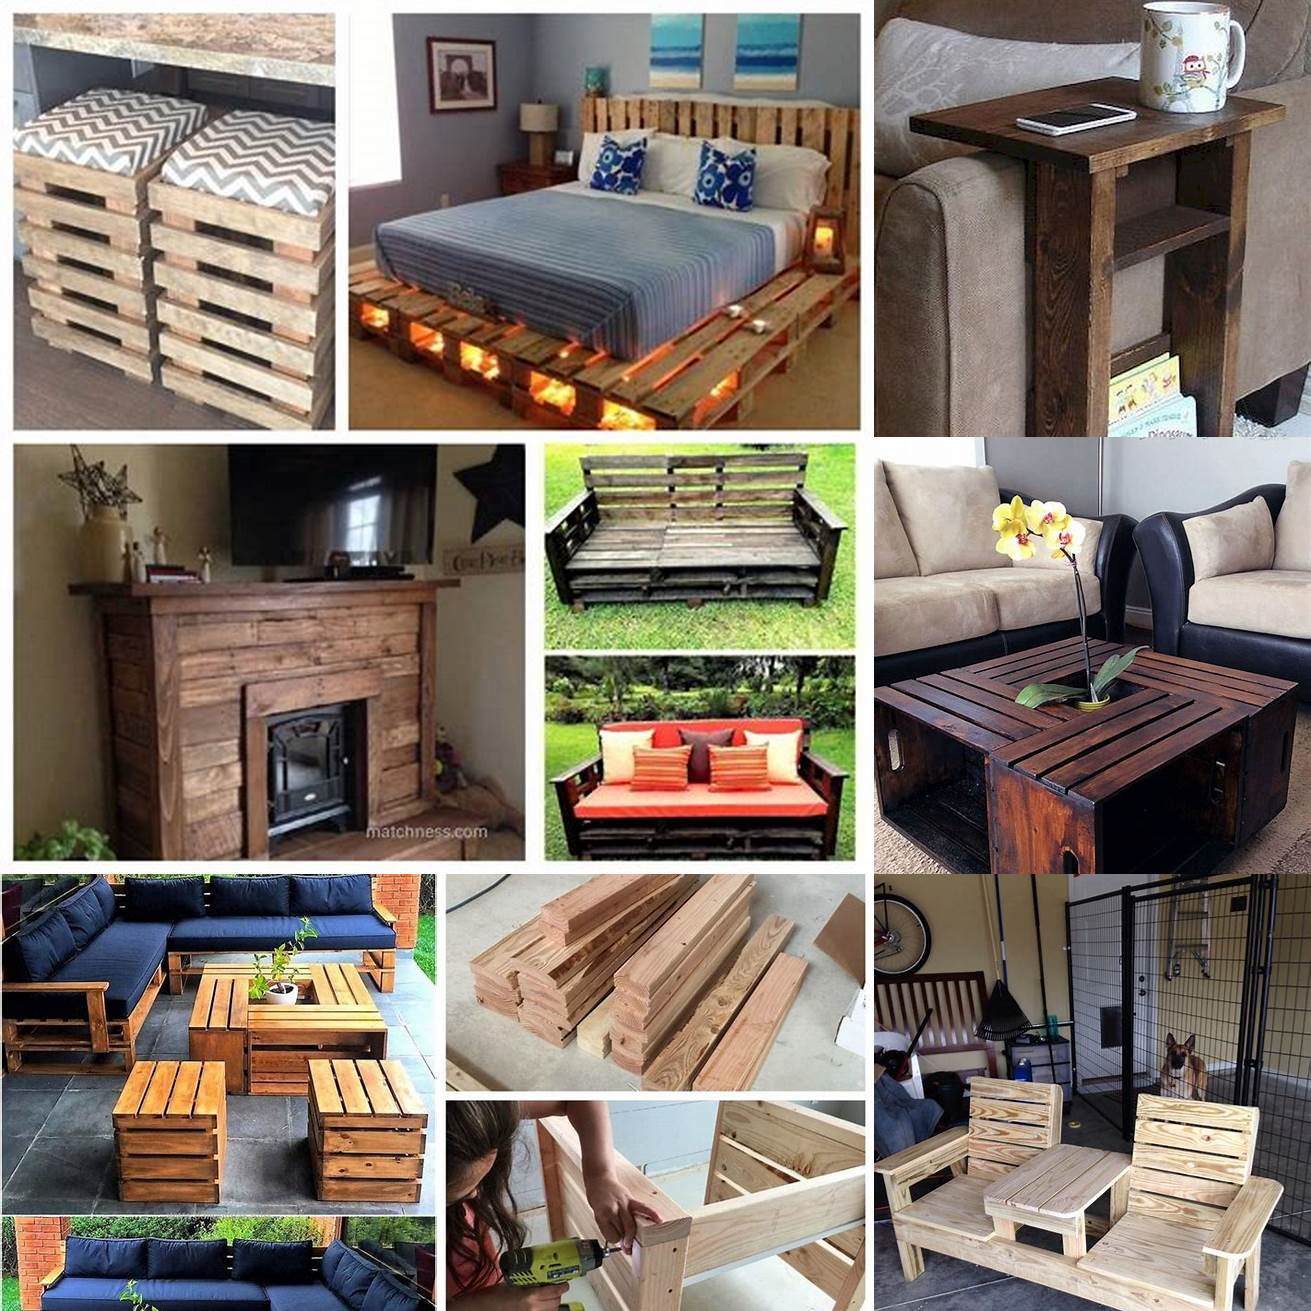 DIY furniture projects